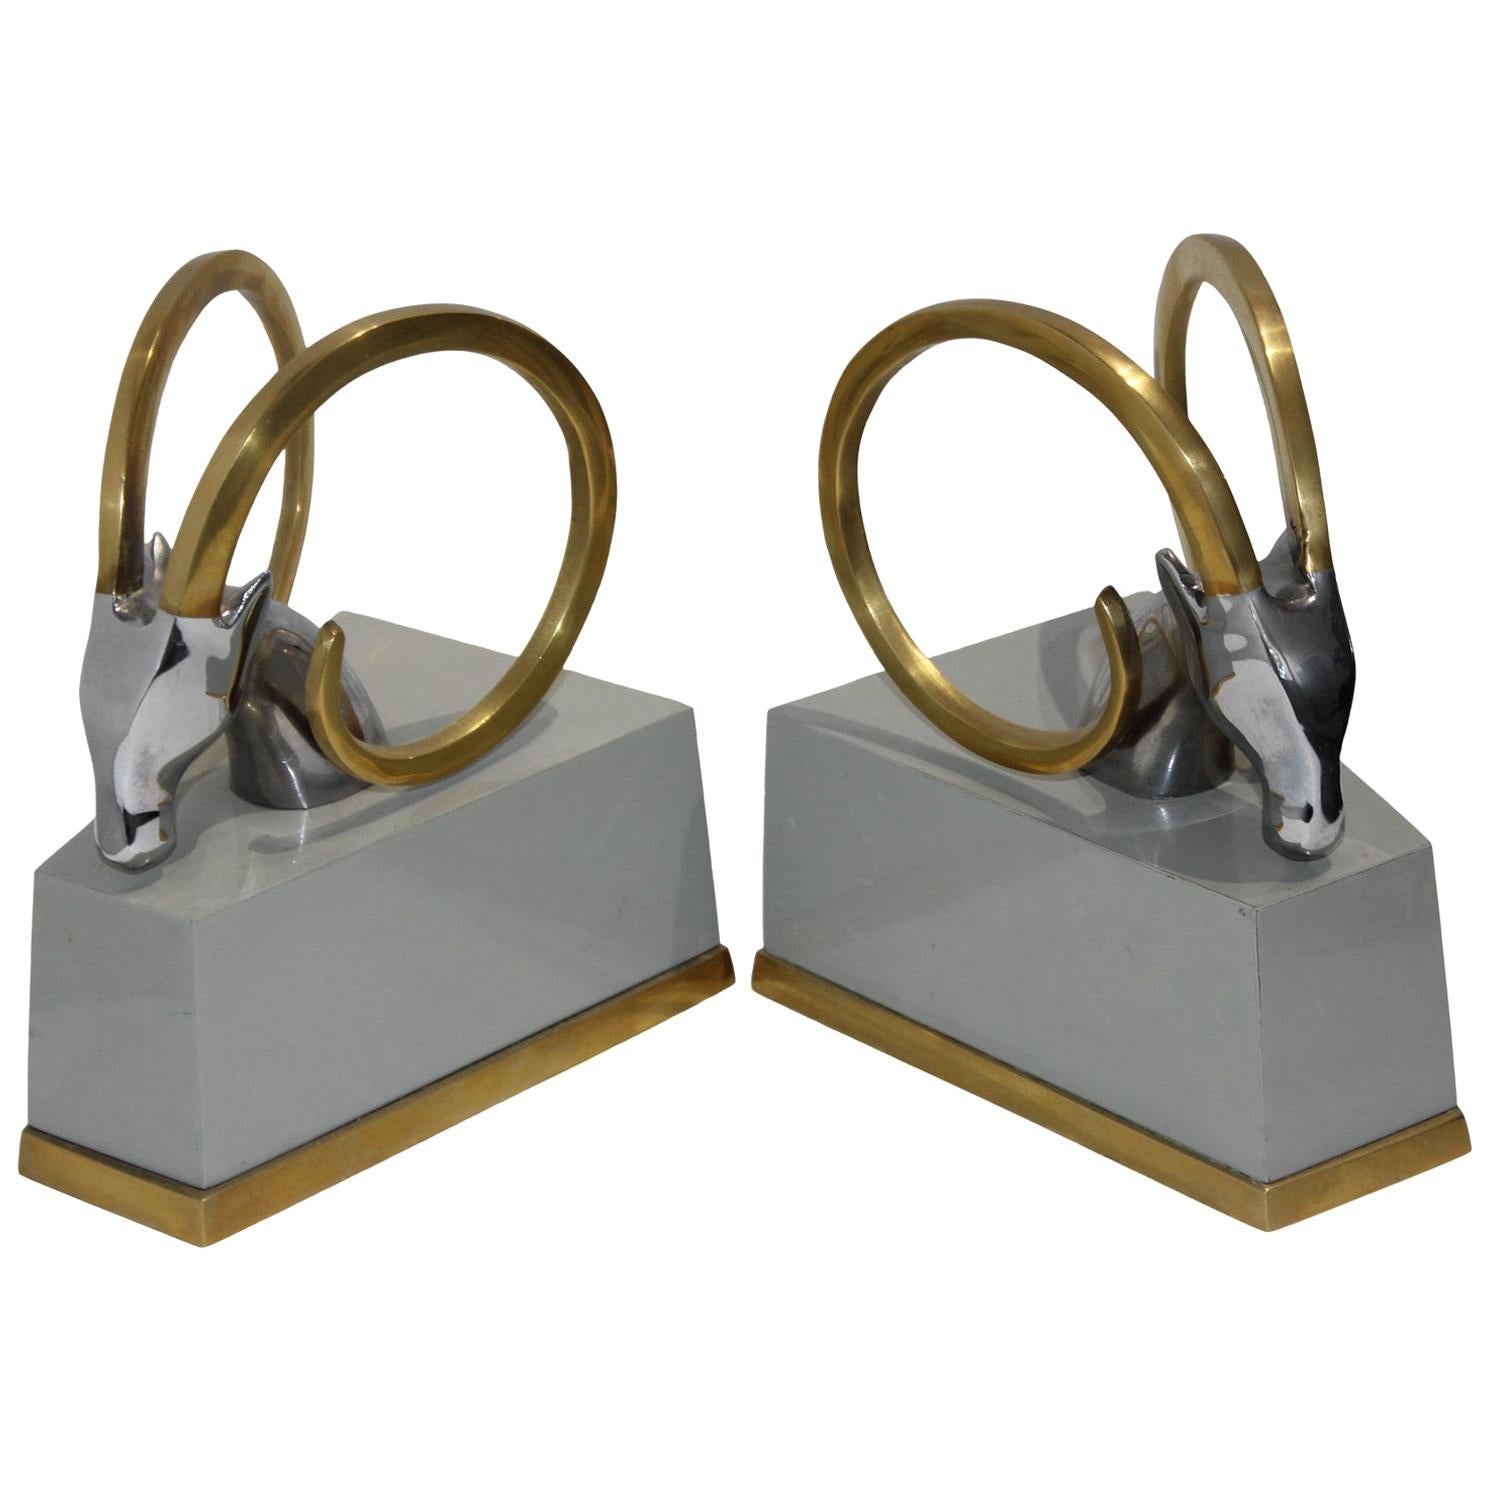 Art Deco Bookends with Brass Ibex Heads